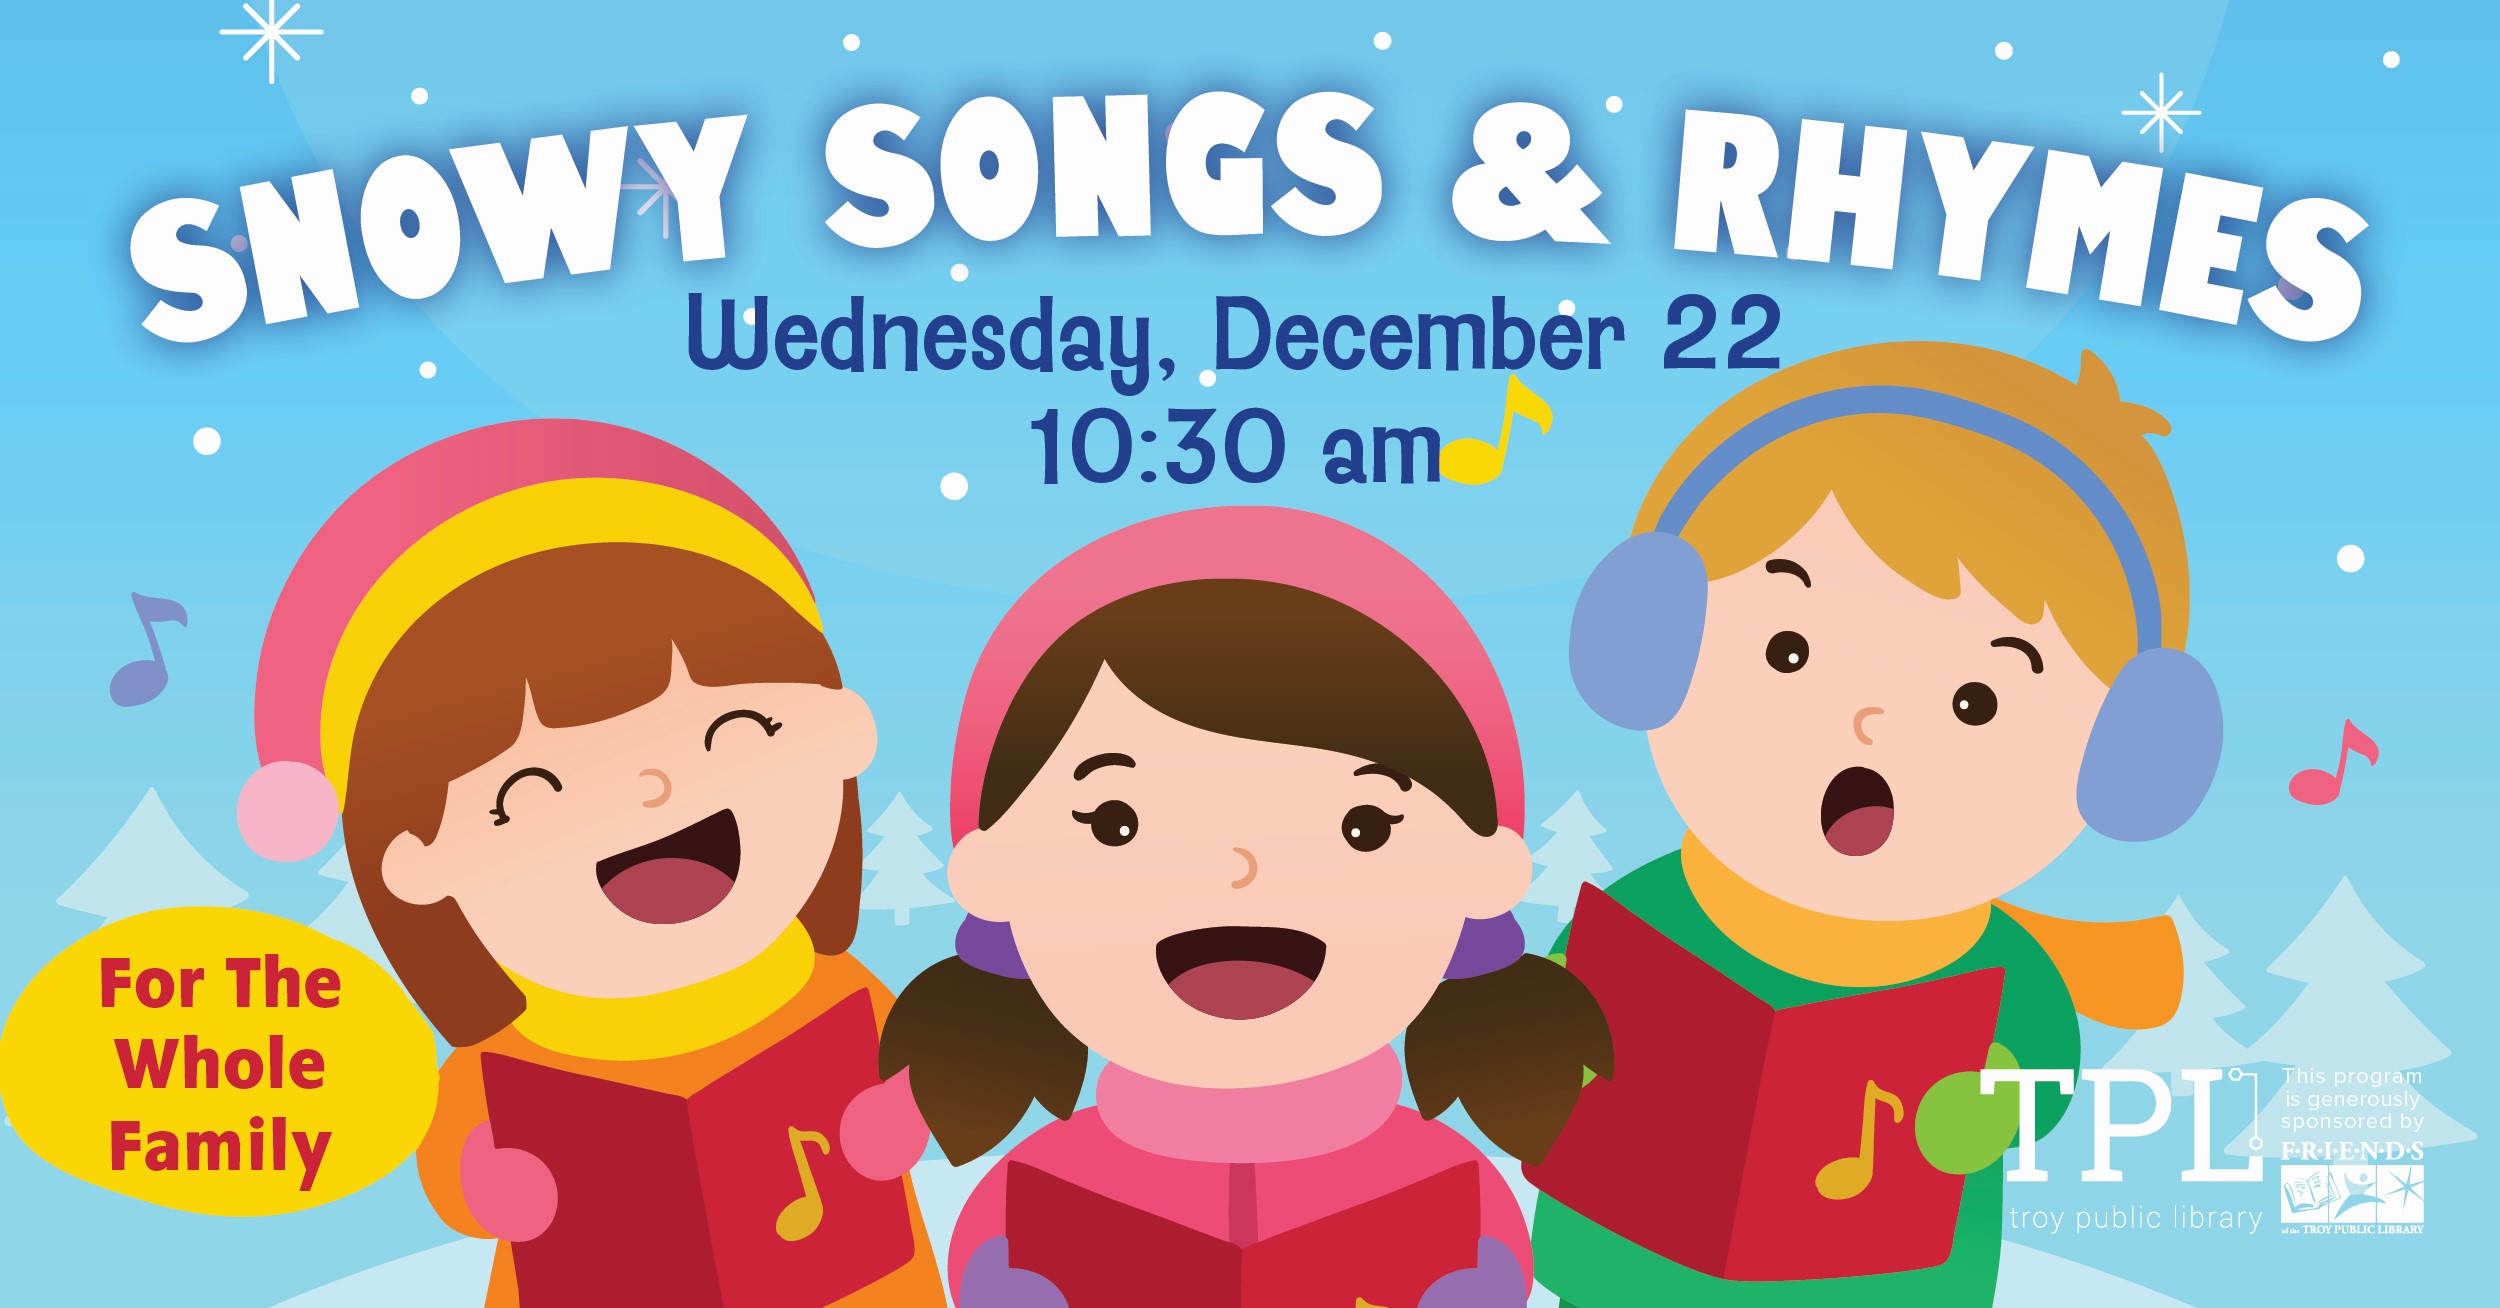 Snowy Songs & Rhymes For the Whole Family. Wednesday, December 22 at 10:30am. Sponsored by the Friends of the Troy Public Library